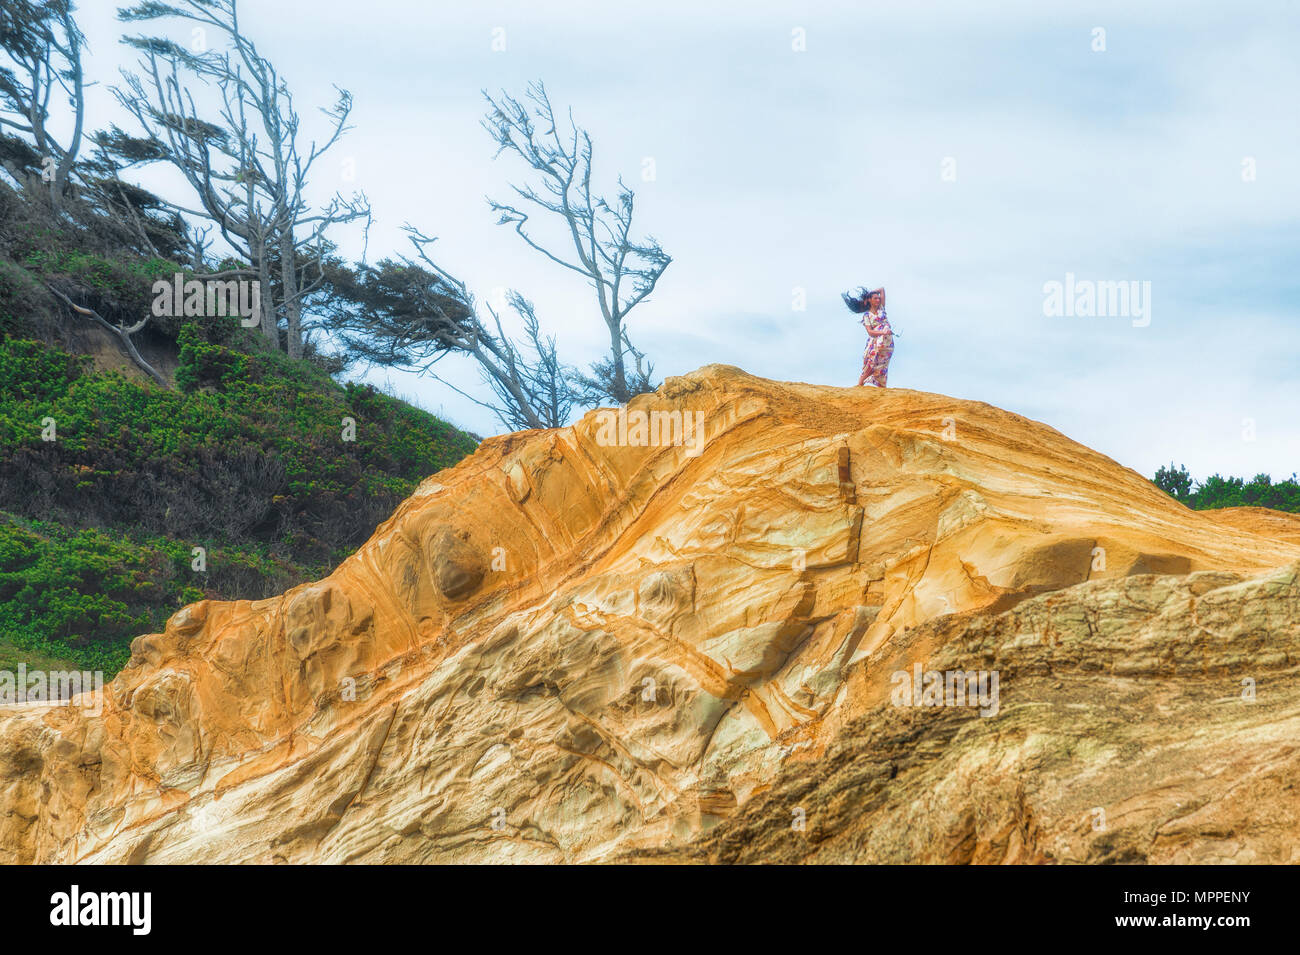 Pacific City, Oregon, USA - September 13, 2015:  A young woman in a long dress with long hair stands on top of a sandstone bluff.  Her long hair and d Stock Photo